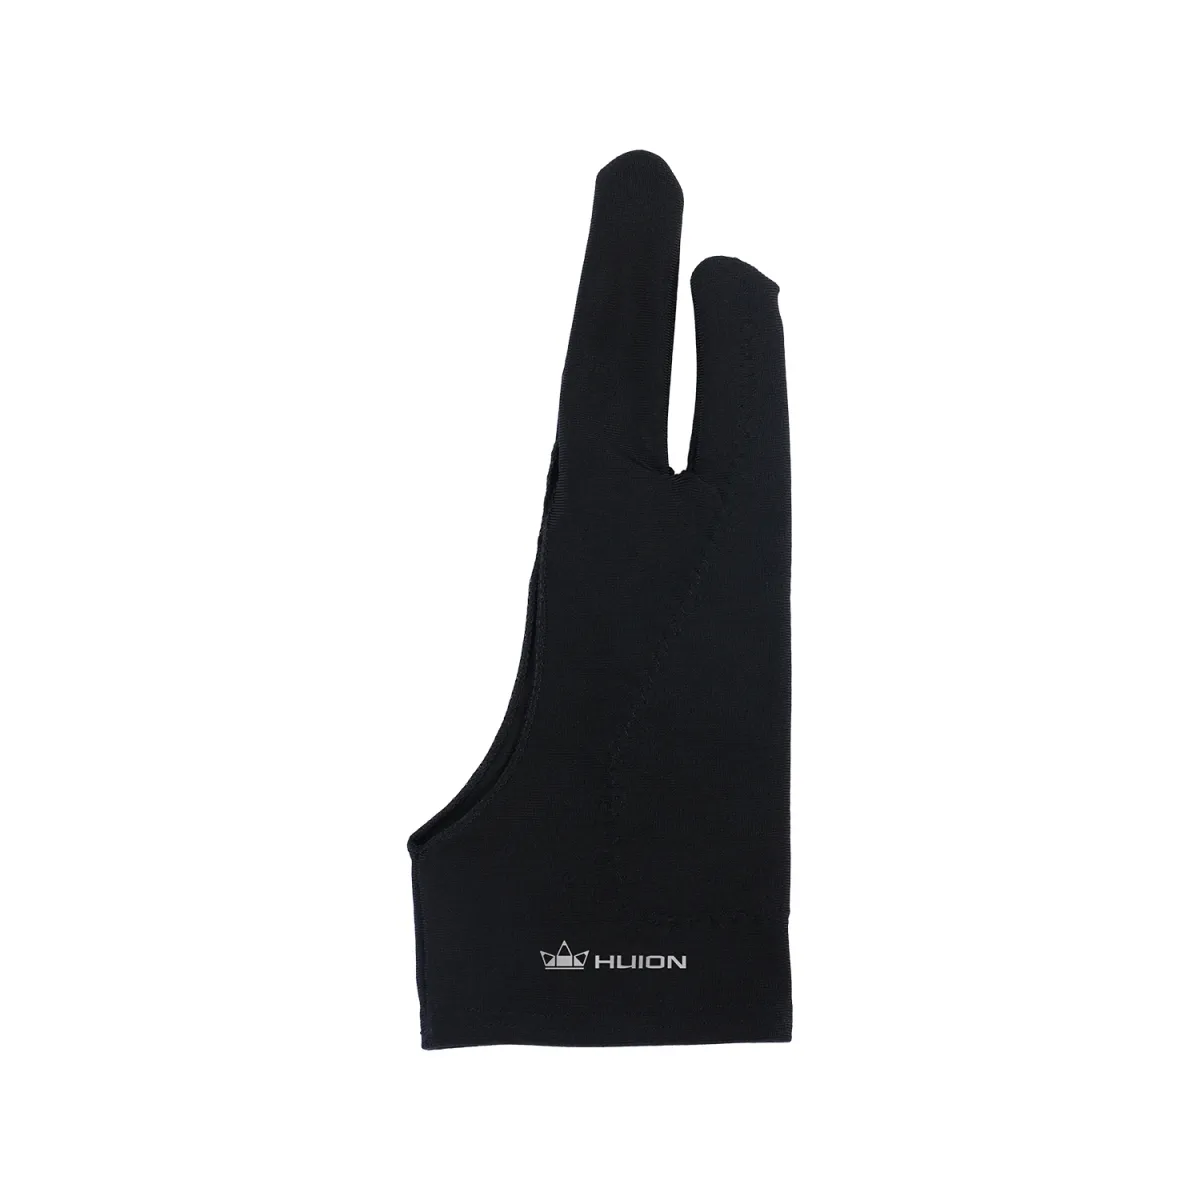 Glove for Drawing Tablet Digital Drawing Glove Elastic Palm Rejection